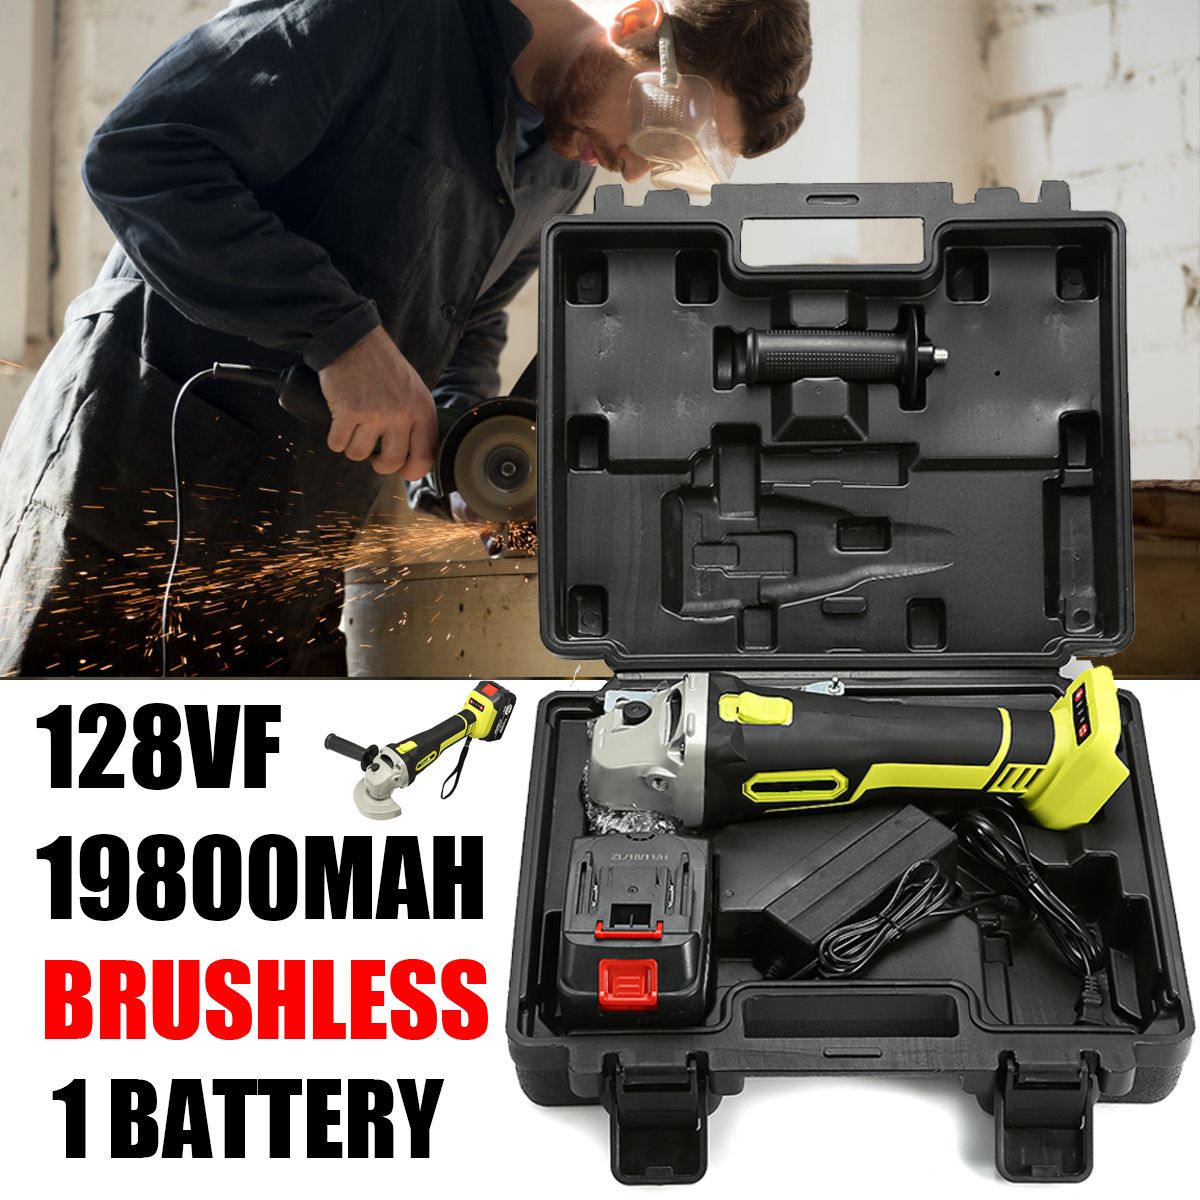 128VF-19800mAh-Lithium-Ion-Brushless-Cut-Off-Angle-Grinder-Cordless-Electric-Angle-Grinder-Power-Cut-1397283